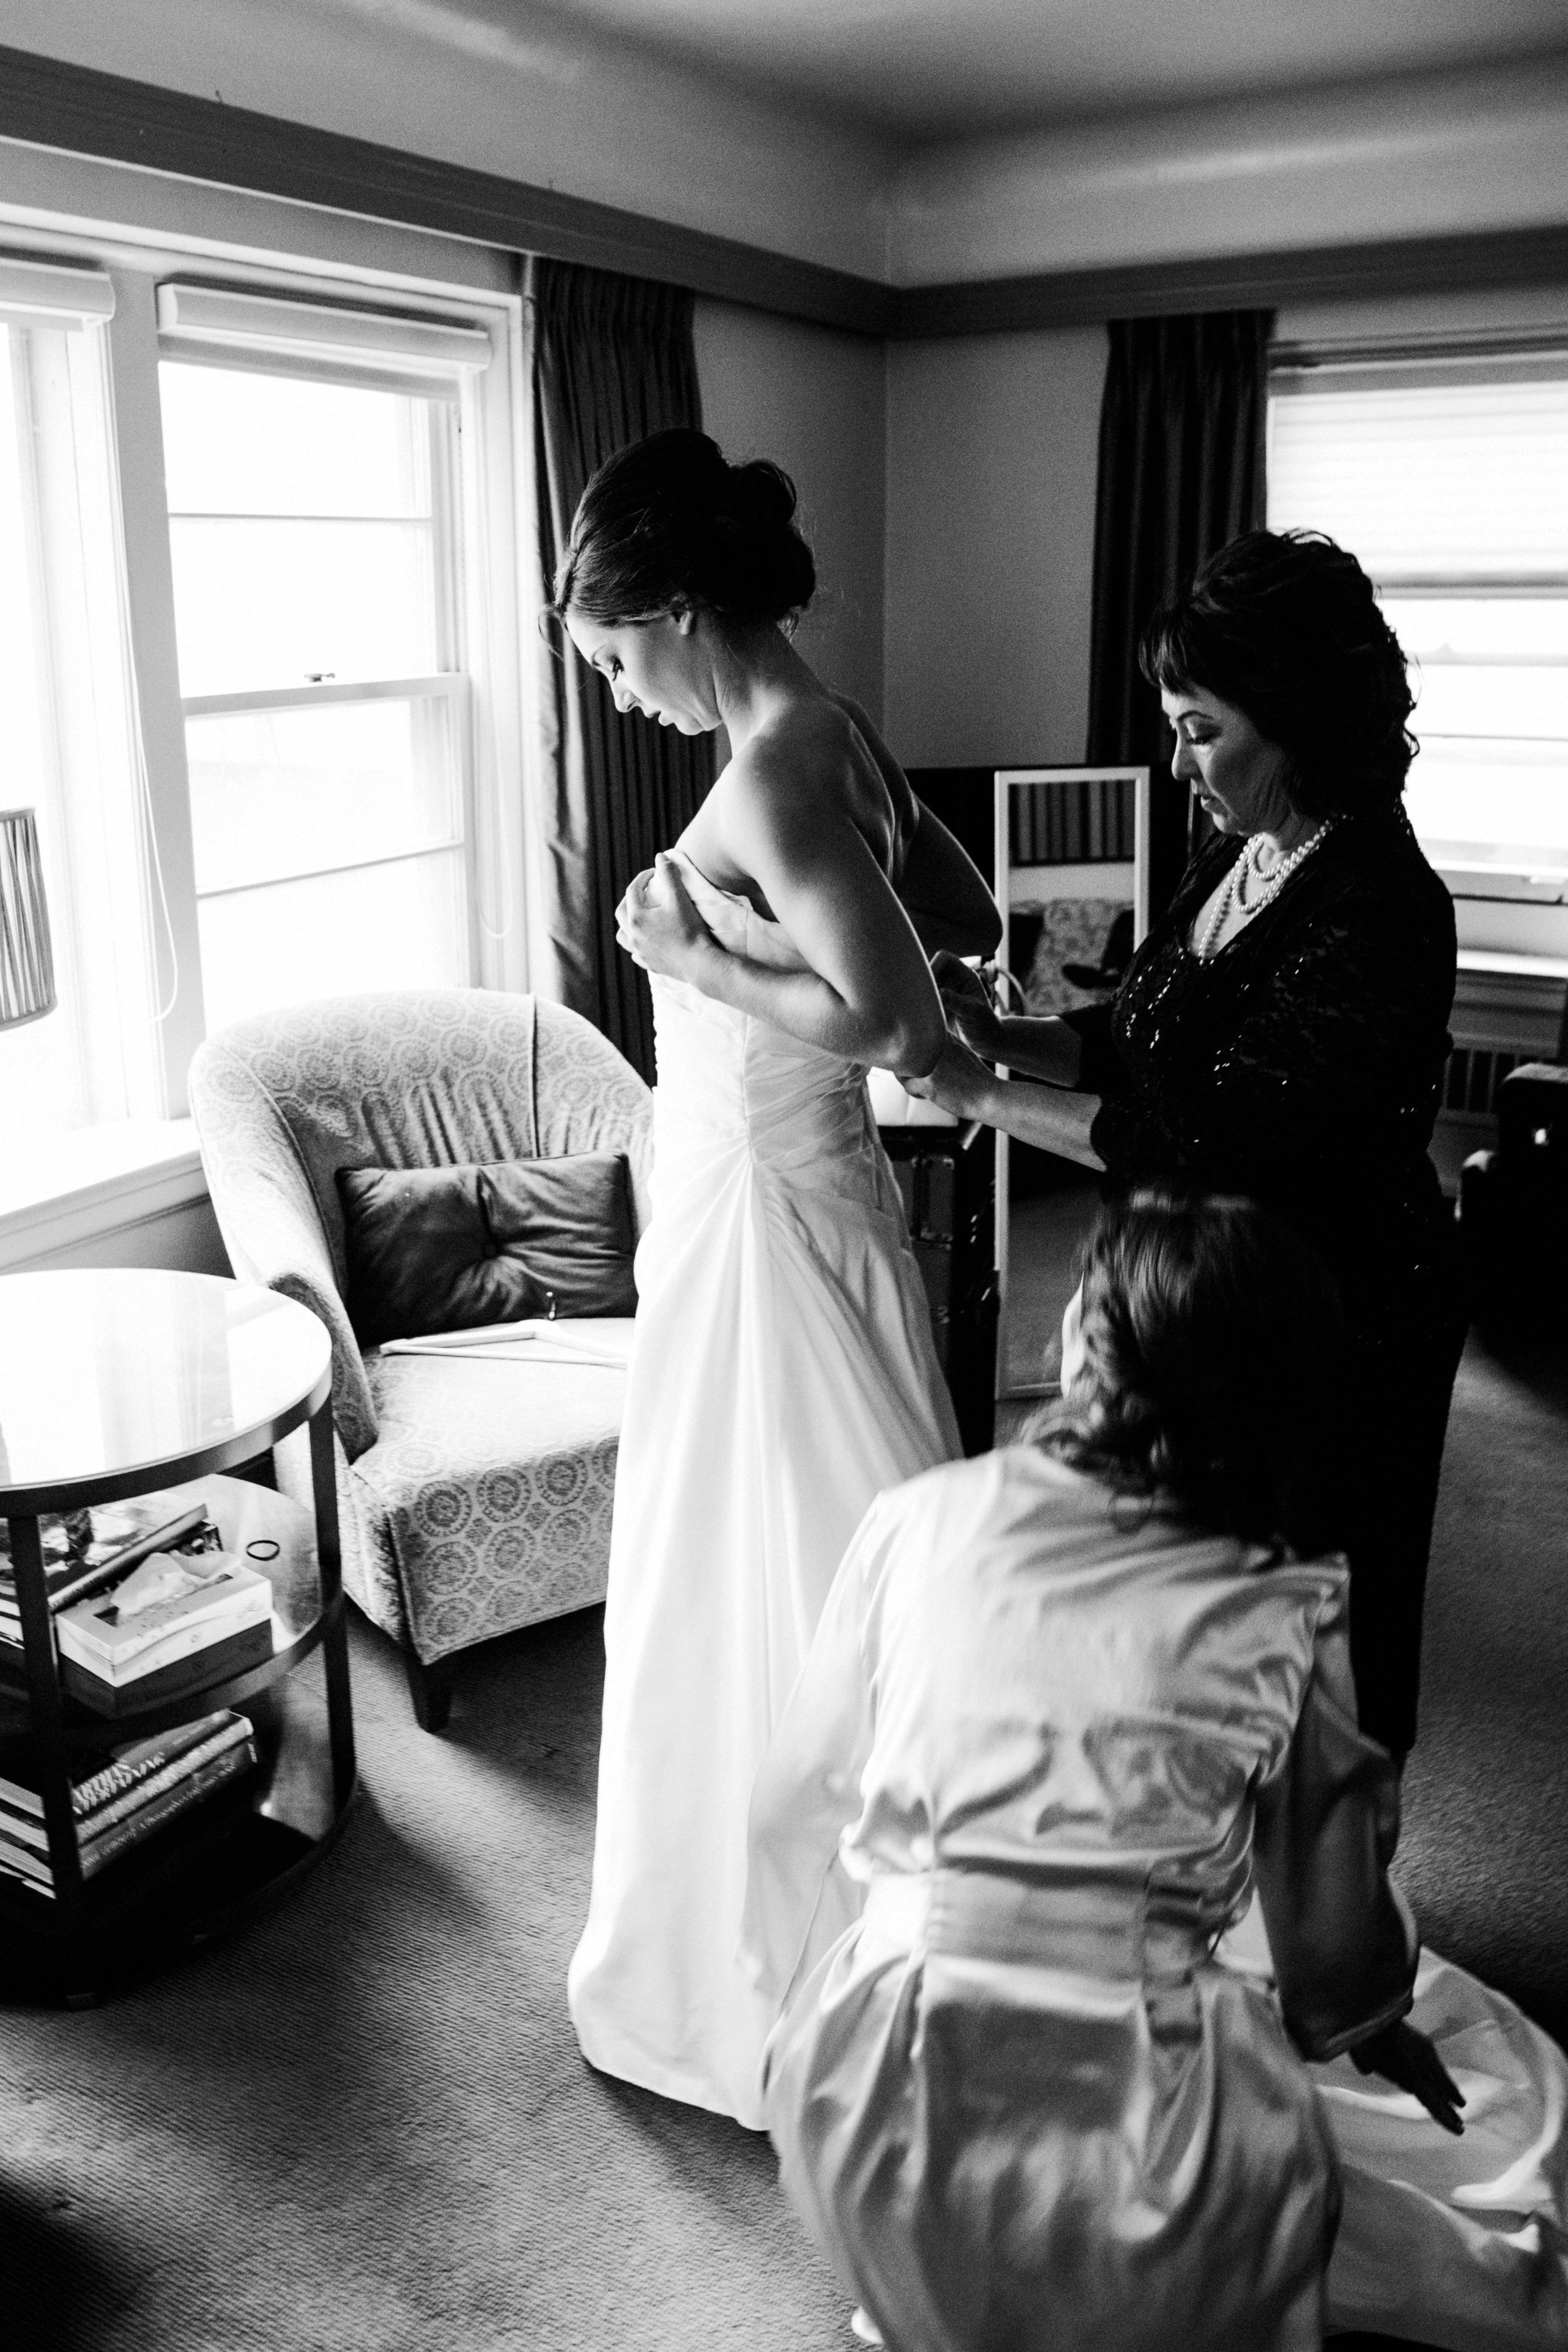 black and white | wedding | wedding photos | wedding photography | images by feliciathephotographer.com | Country Club Plaza | Kansas City | Unity Temple | wedding prep | getting ready | candid | stepping into dress | David's Bridal | mother of the bride | mother with bride 